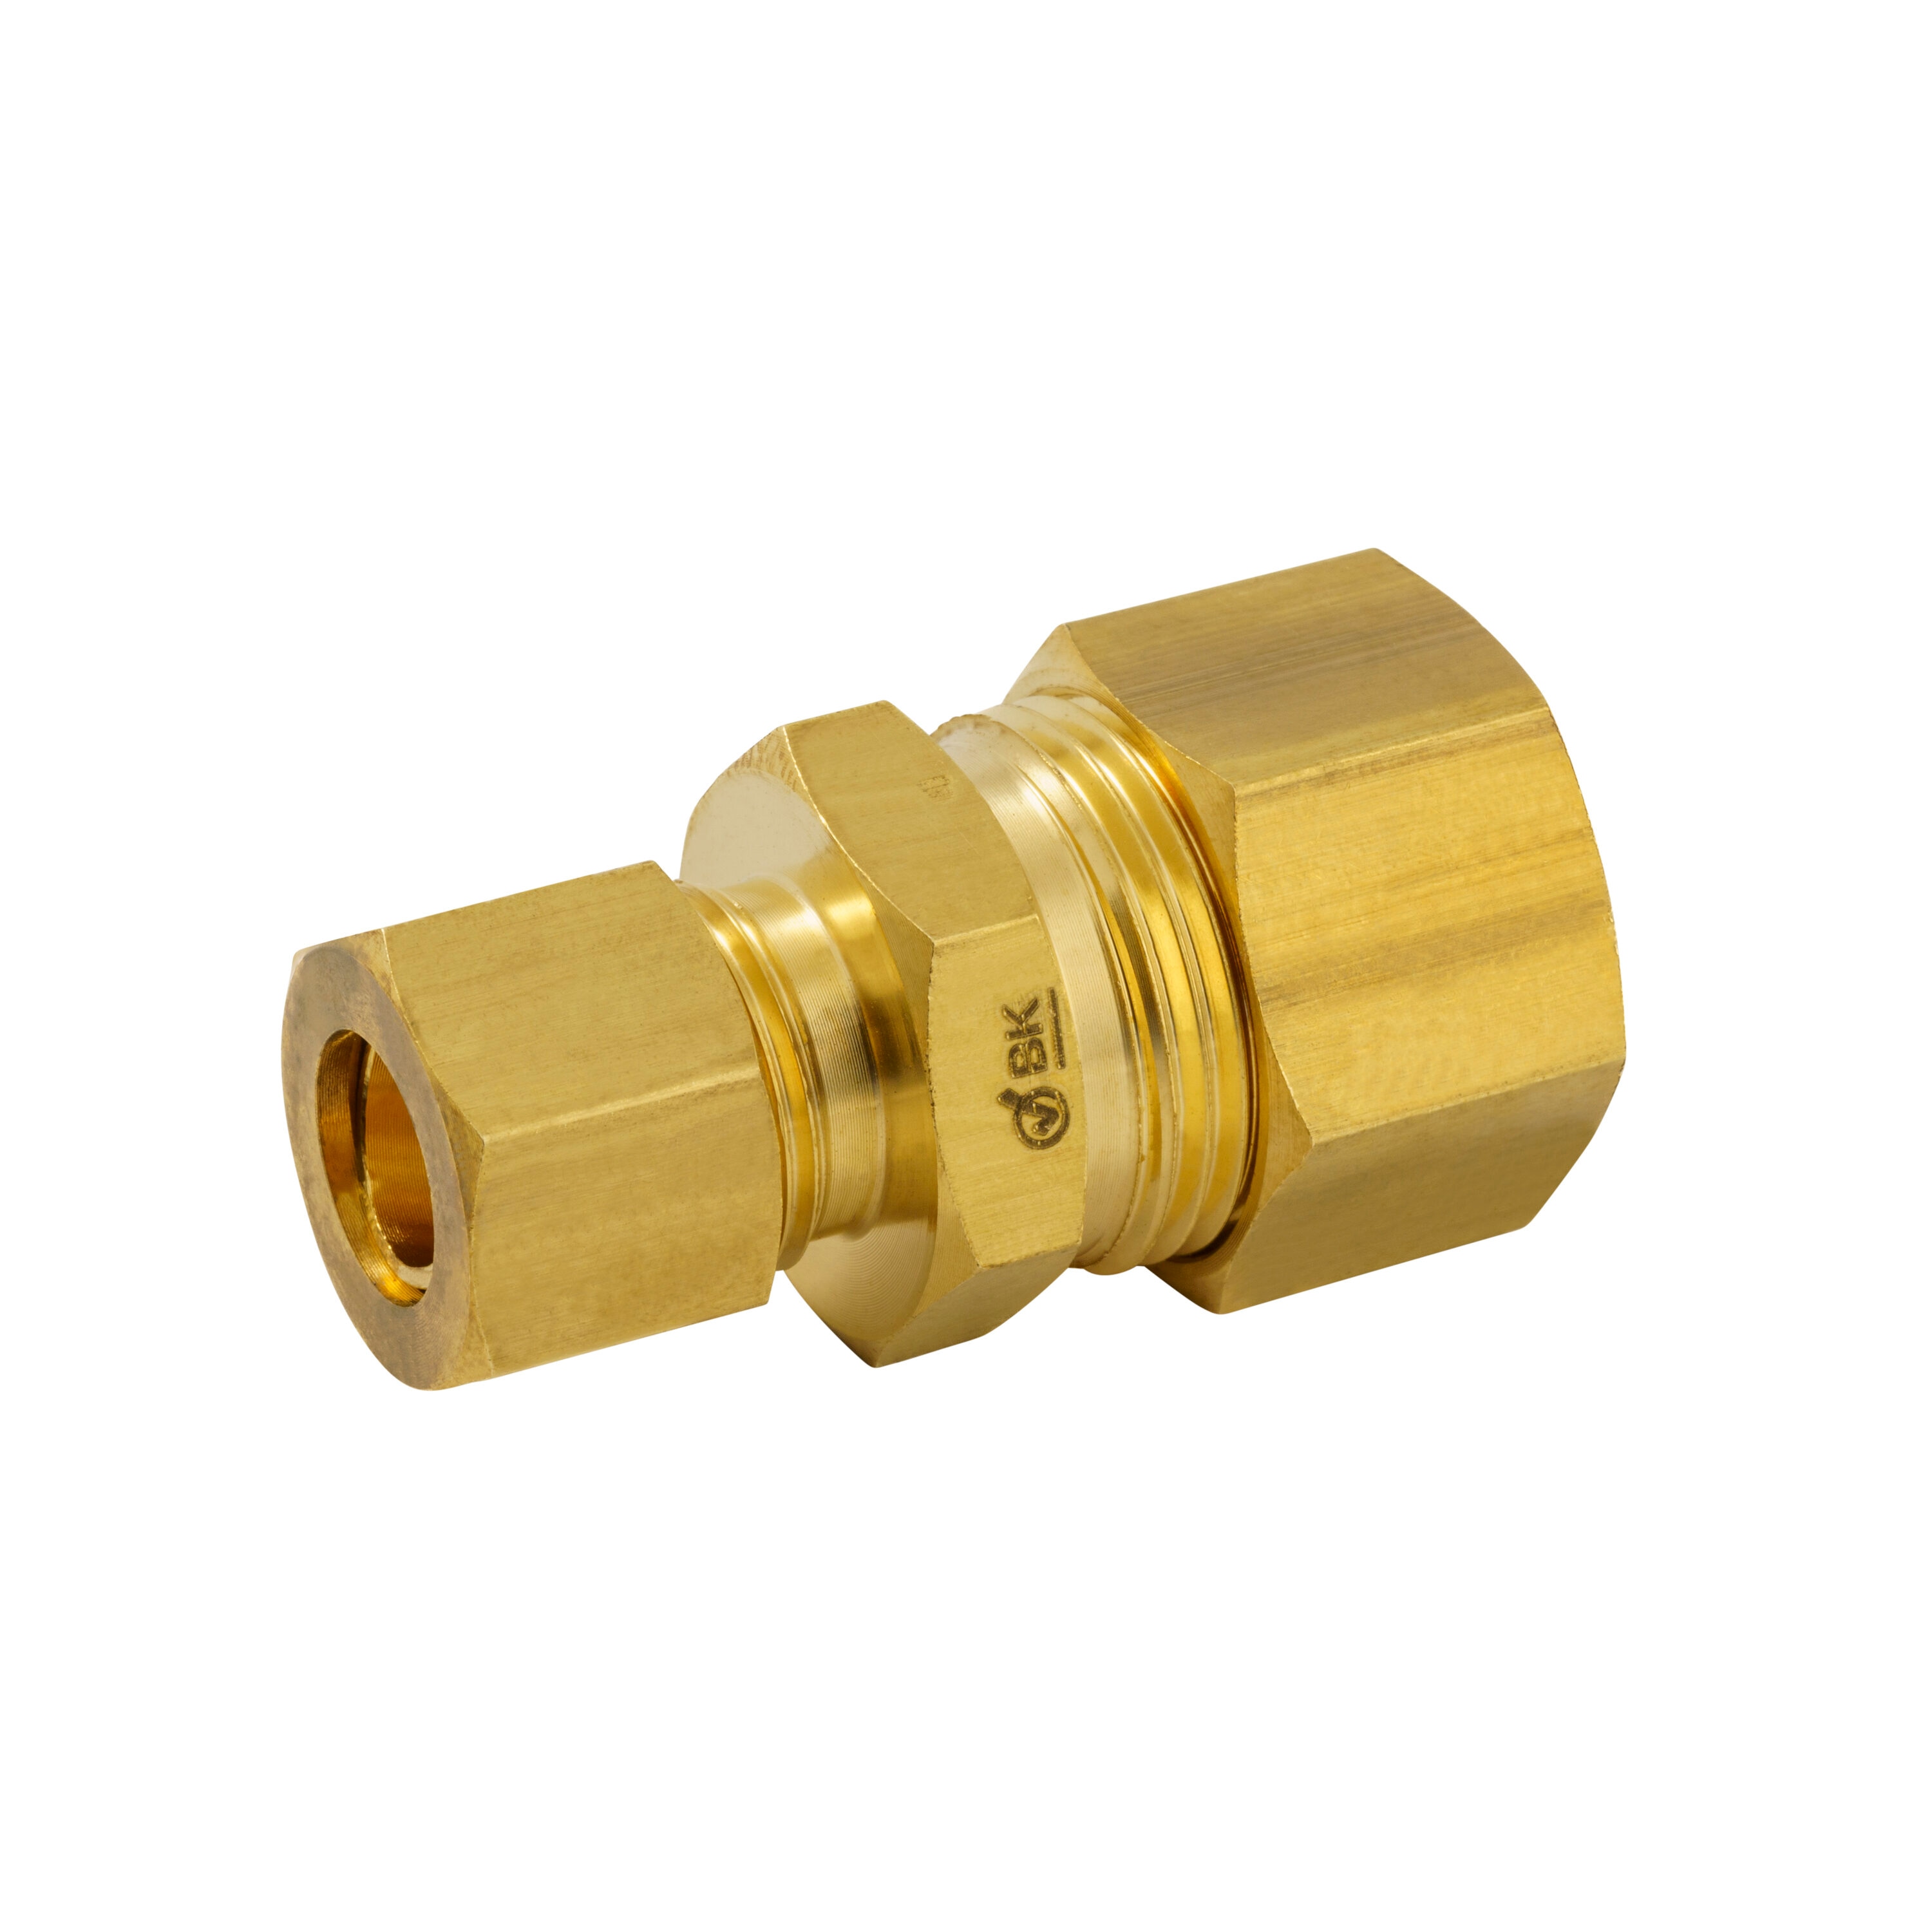 Proline Series 5/8-in x 3/8-in Compression Reducing Union Fitting